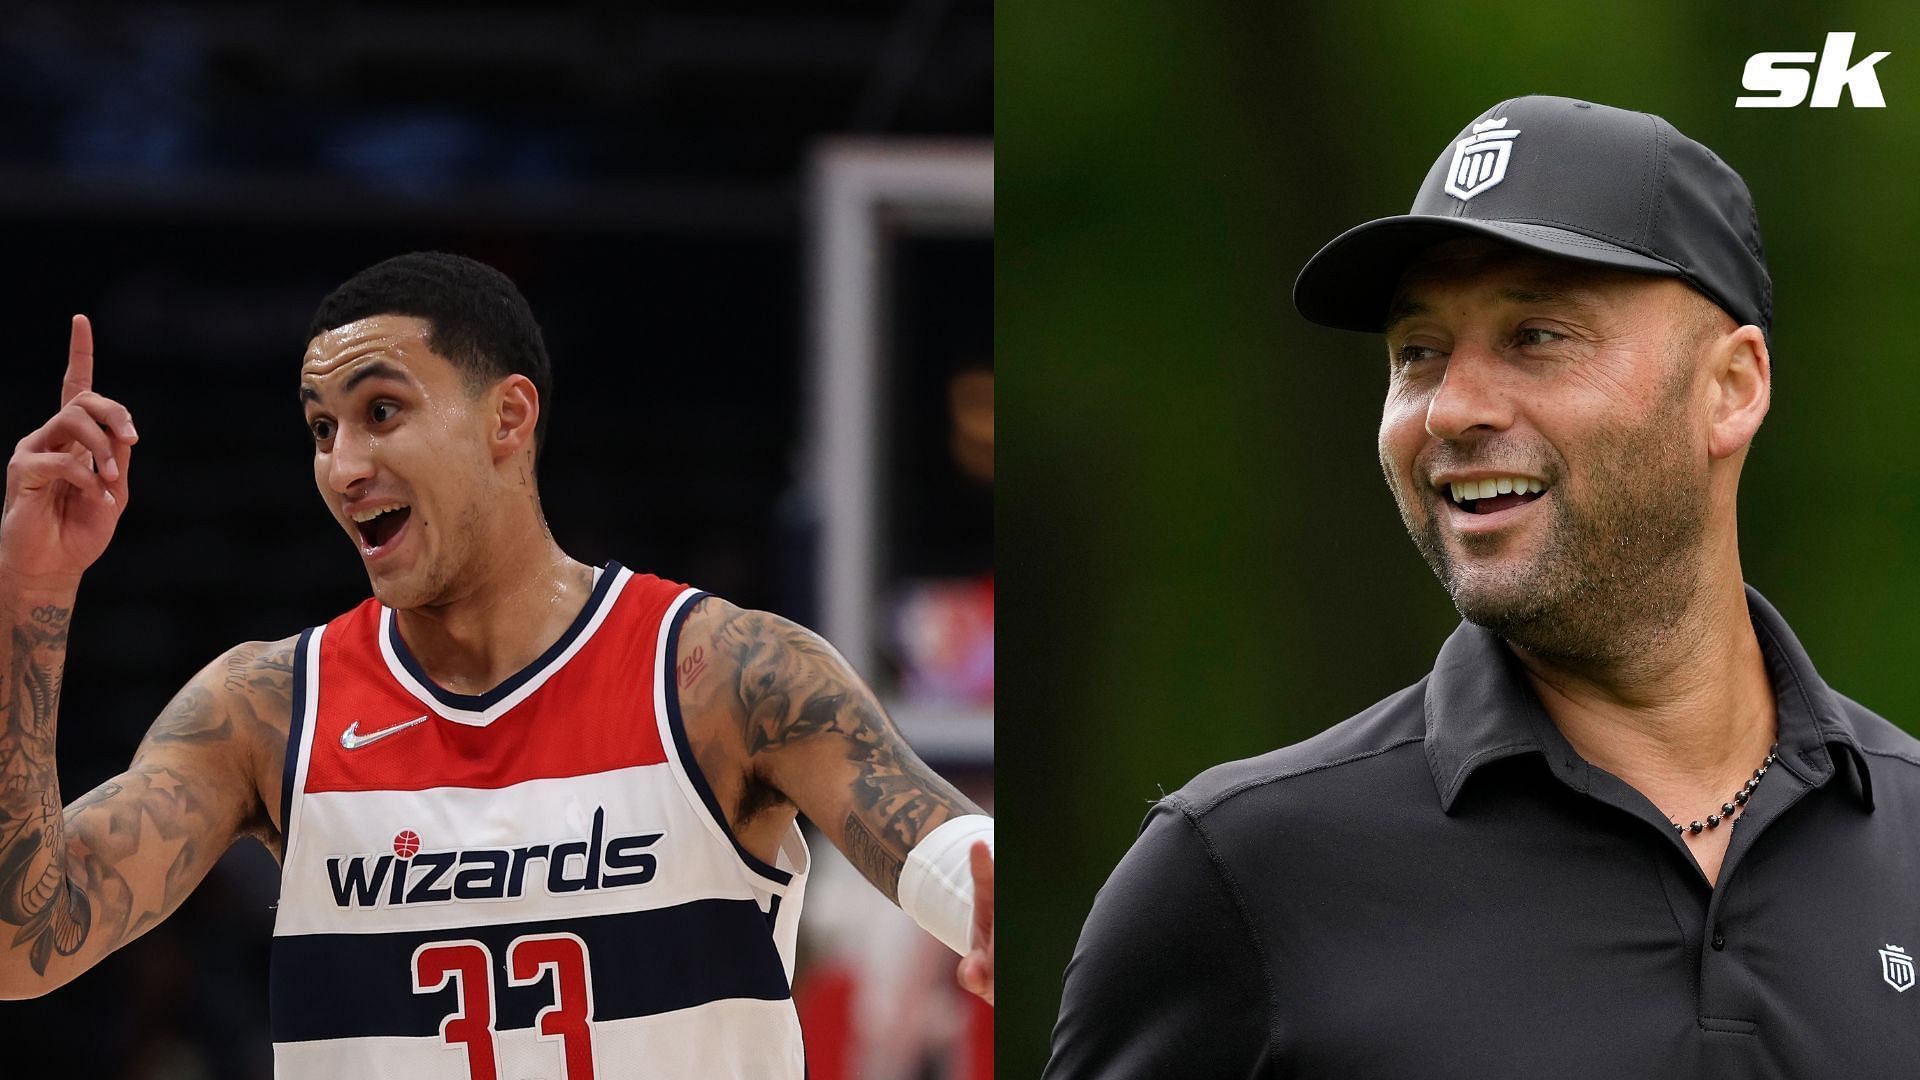 NBA star Kyle Kuzma was among the high-profile dinner guests spotted with Derek Jeter